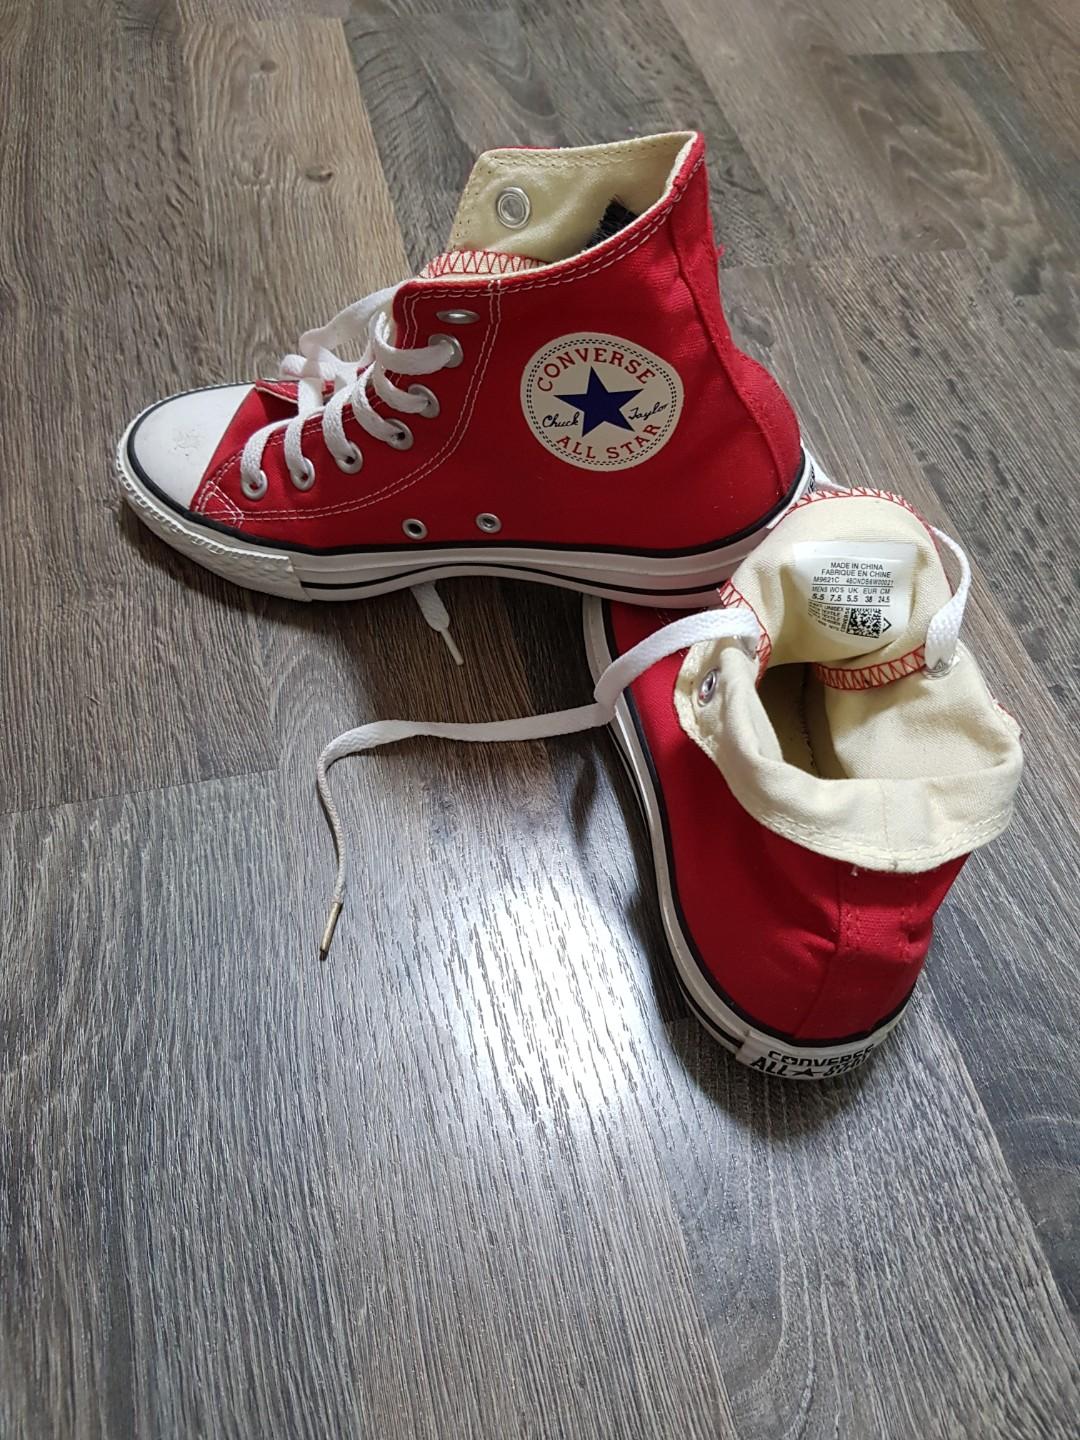 old school converse shoes